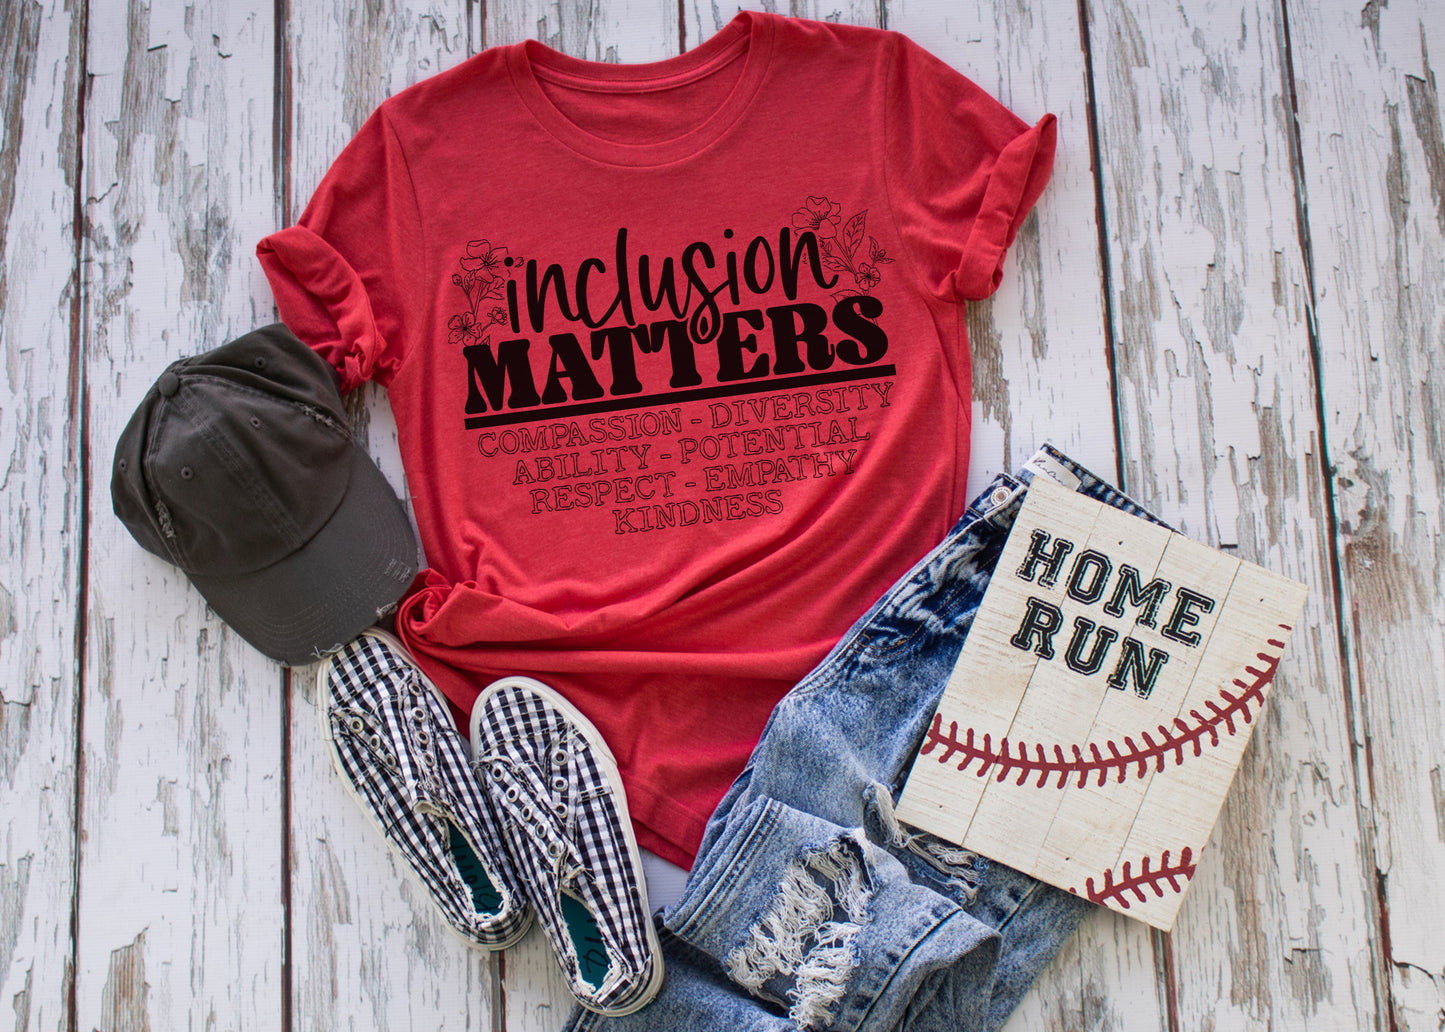 Inclusion matters tee